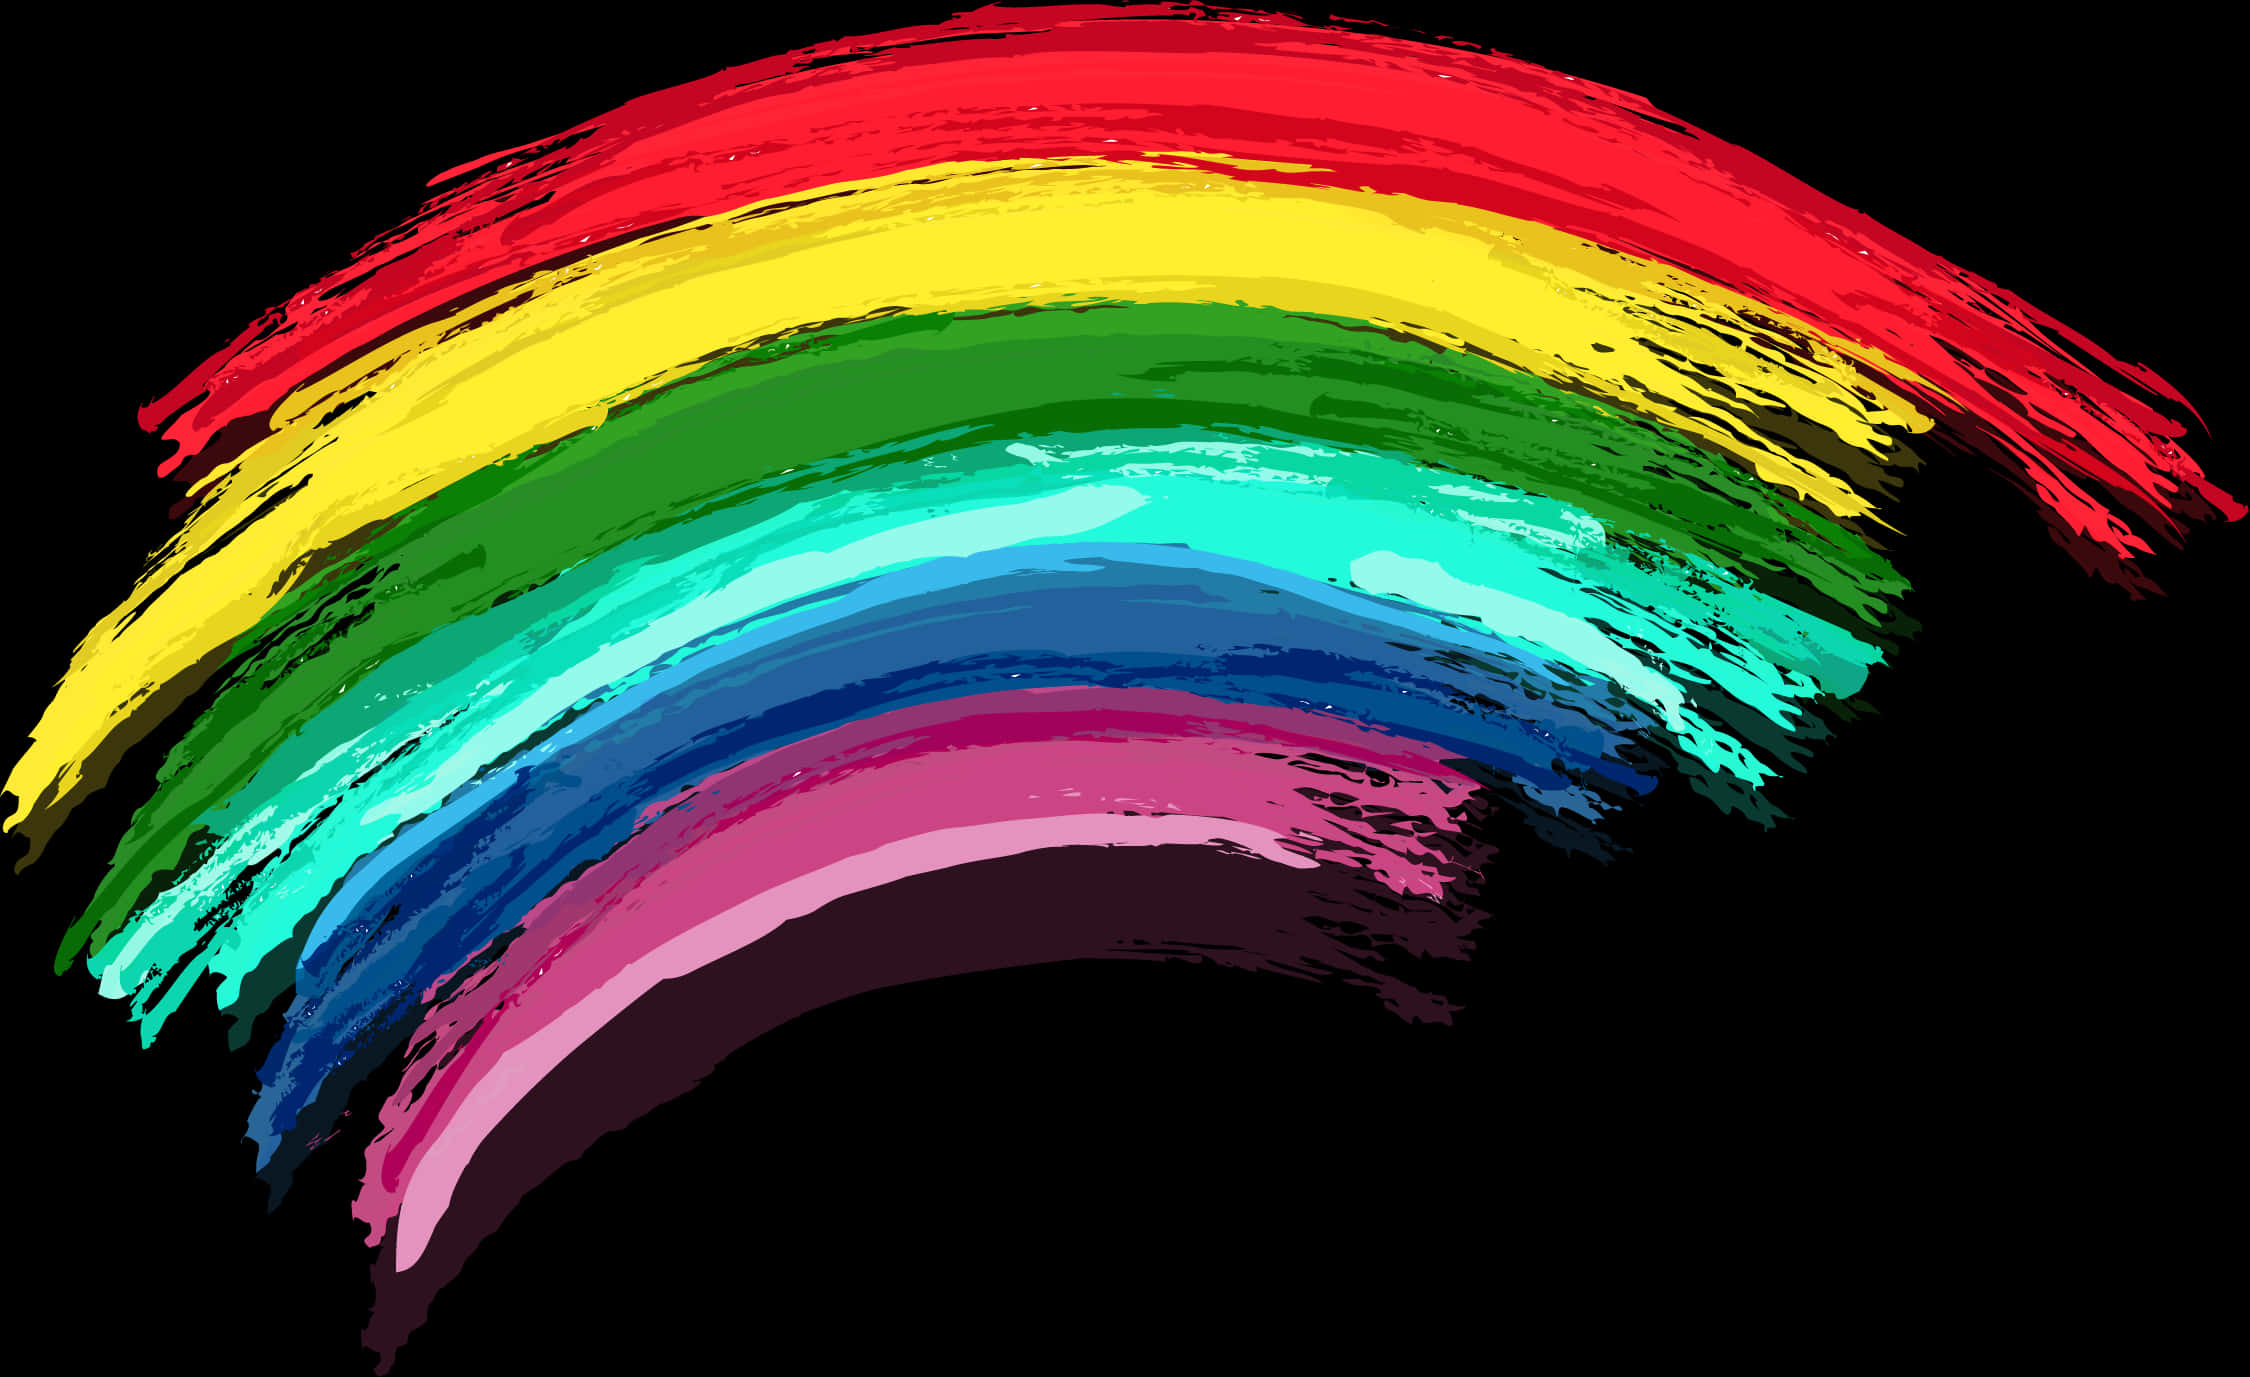 A Rainbow Painted On A Black Background